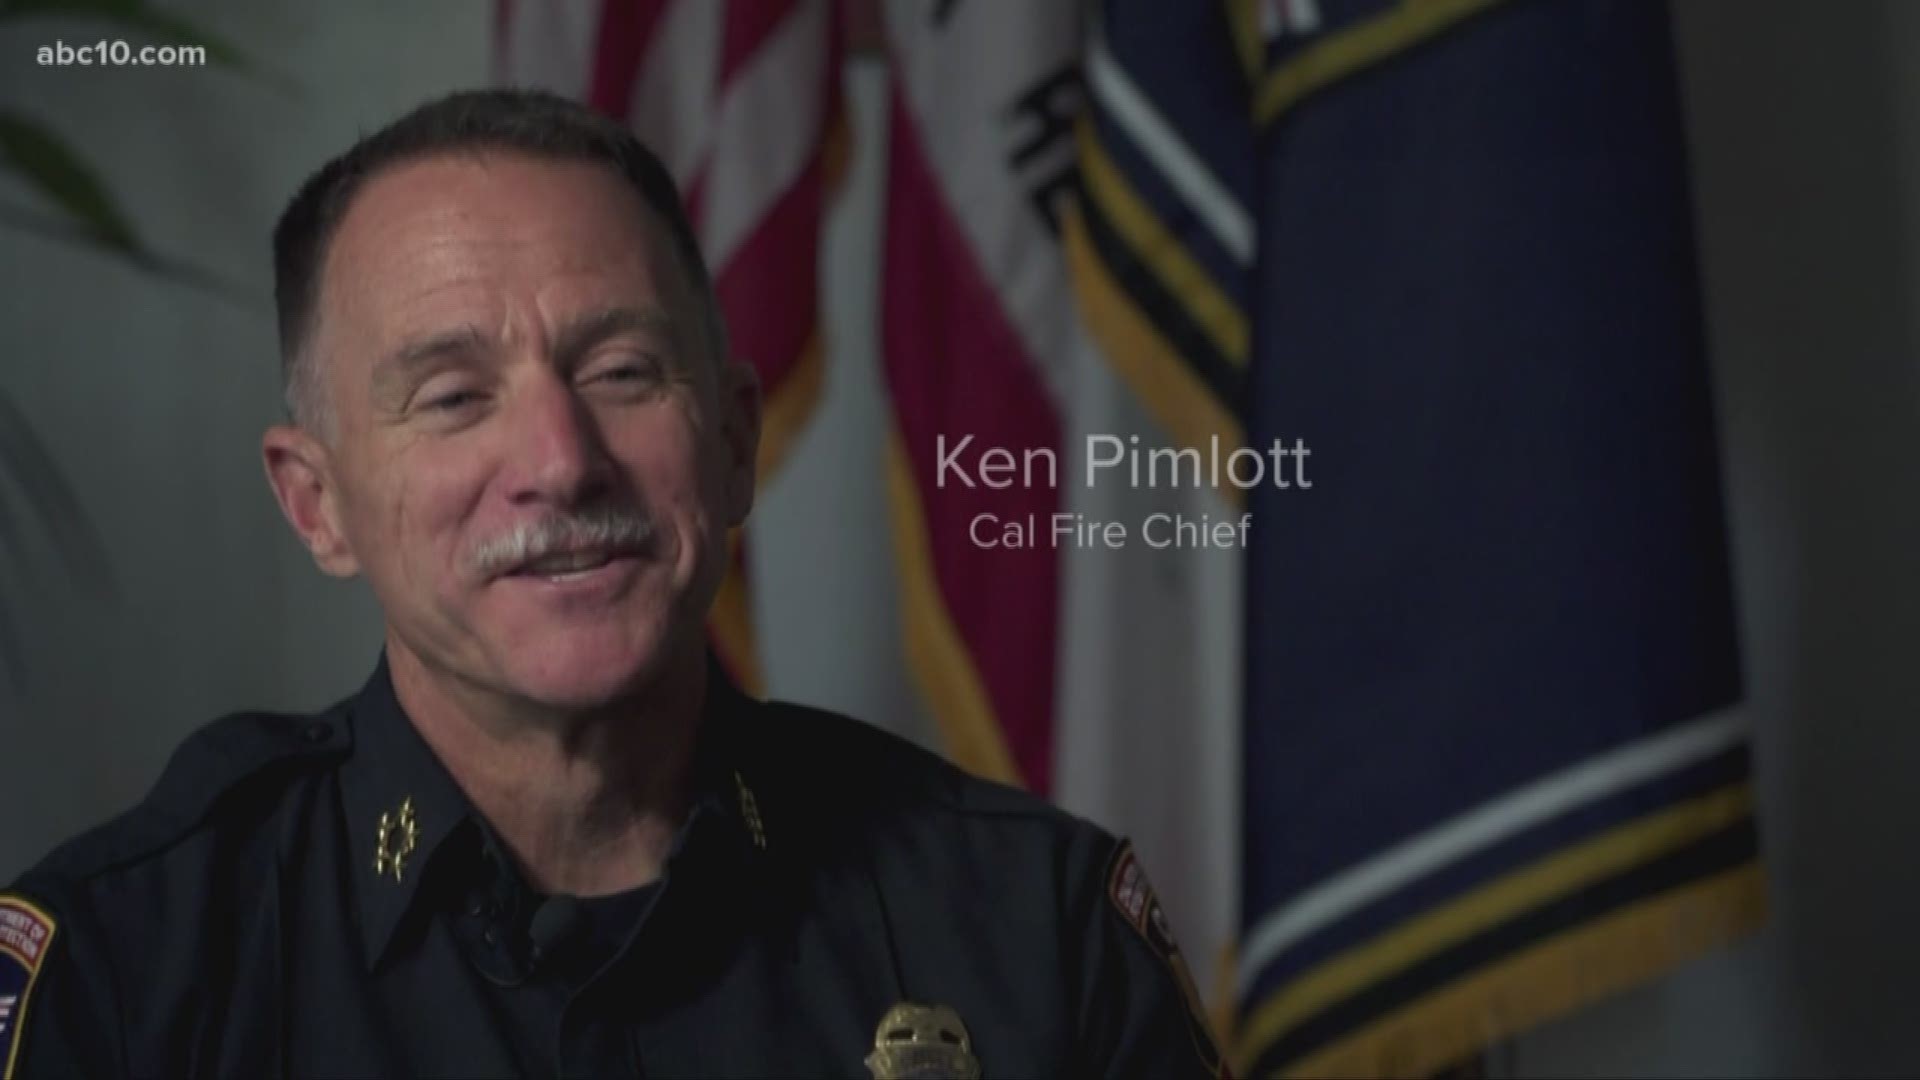 In a wide-ranging interview on the eve of his retirement, CAL FIRE Chief Ken Pimlott reflected on his three decades with the agency and talked about the more recent rise in mega-fires, which he said is a clear product of climate change.